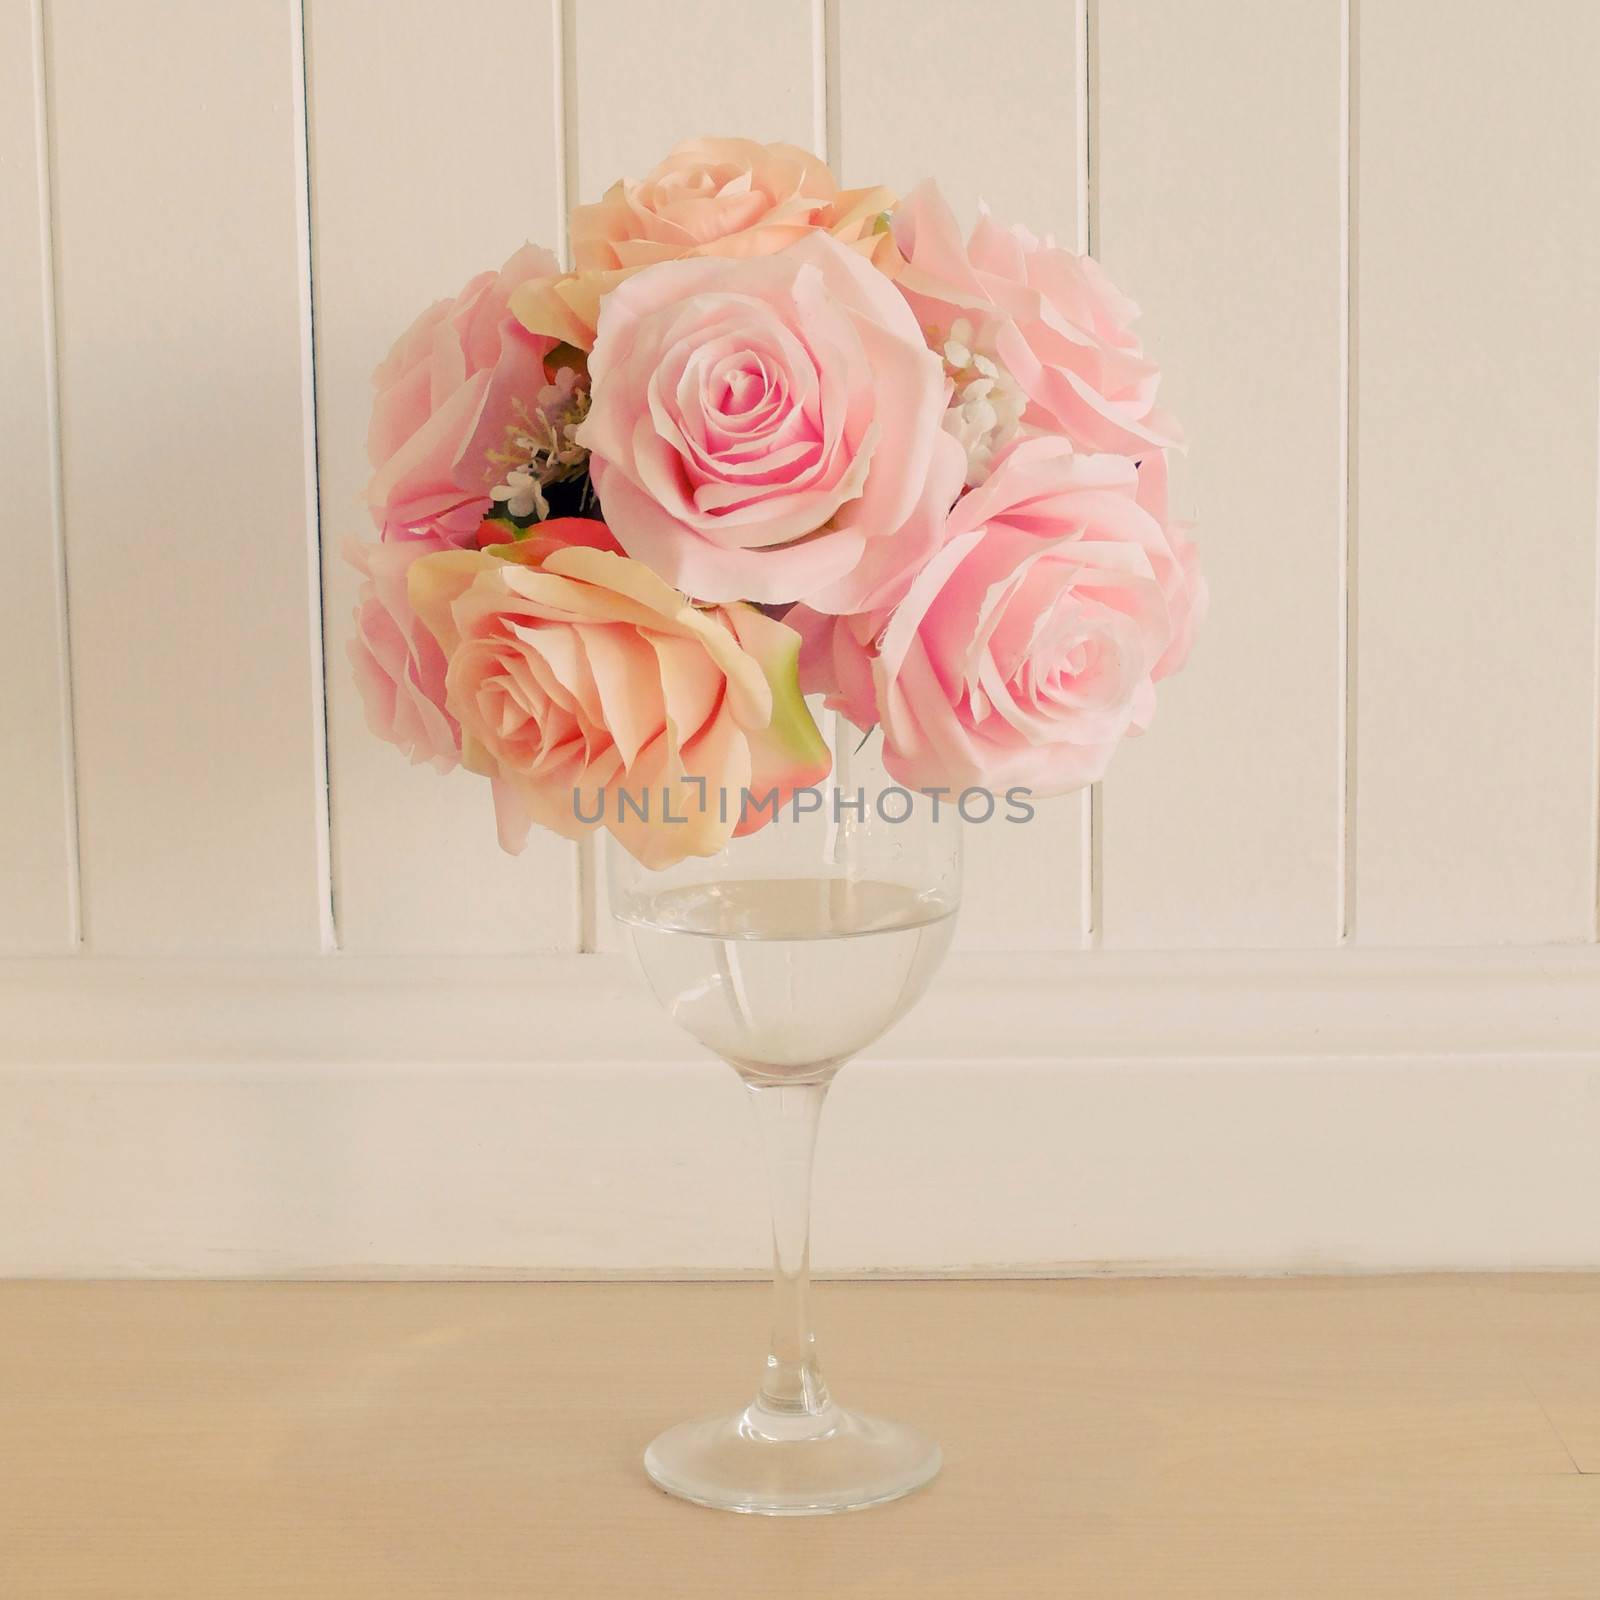 Bunch of rose in glass for decoration with retro filter effect by nuchylee